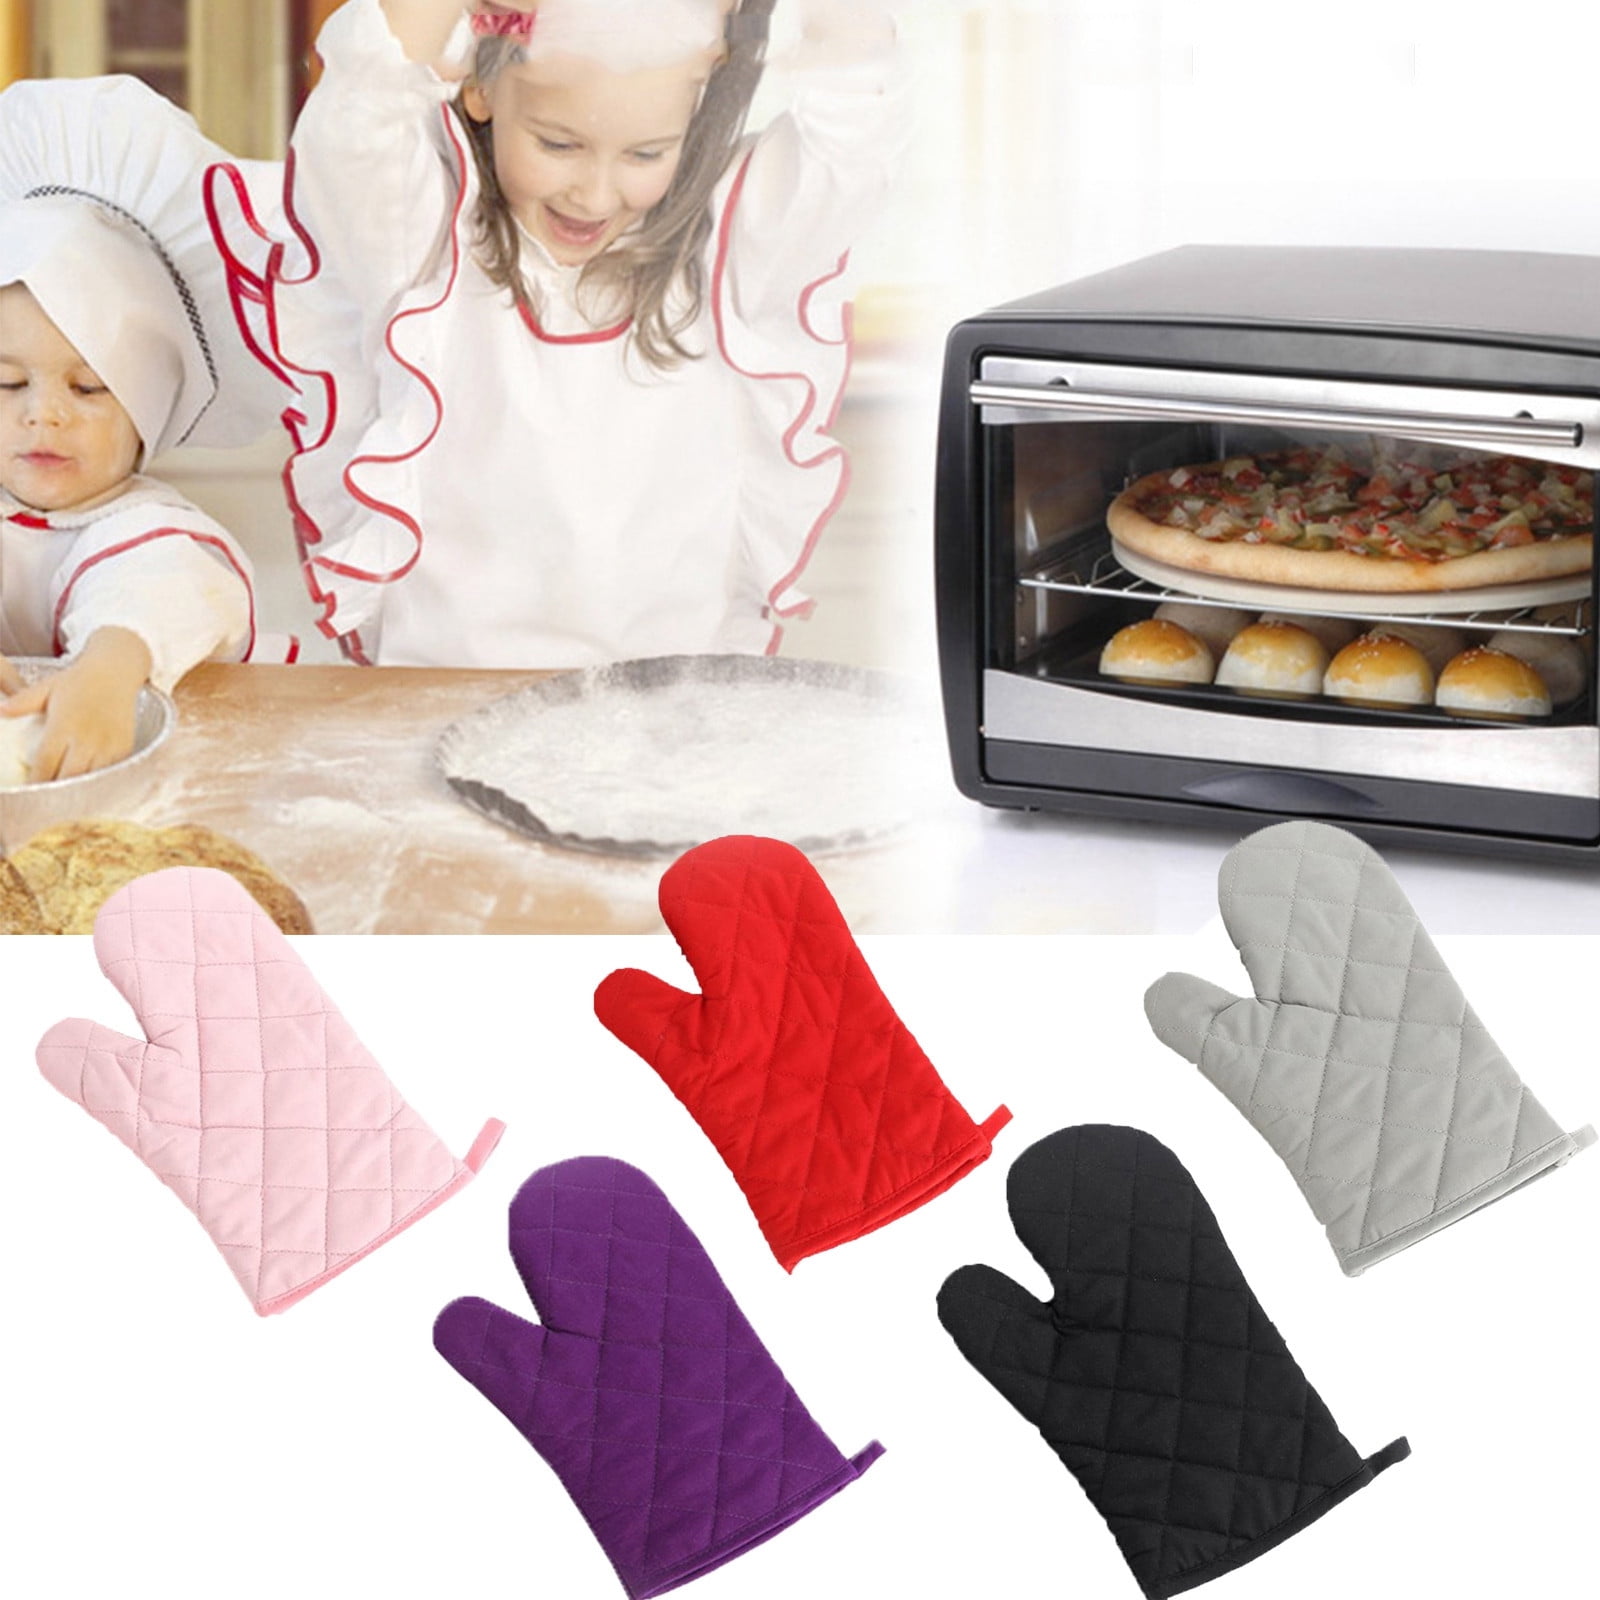 1 Pair Short Oven Mitts, Heat Resistant Silicone Kitchen Mini Oven Mitts for 500 Degrees, Non-Slip Grip Surfaces and Hanging Loop Gloves, Baking Grill